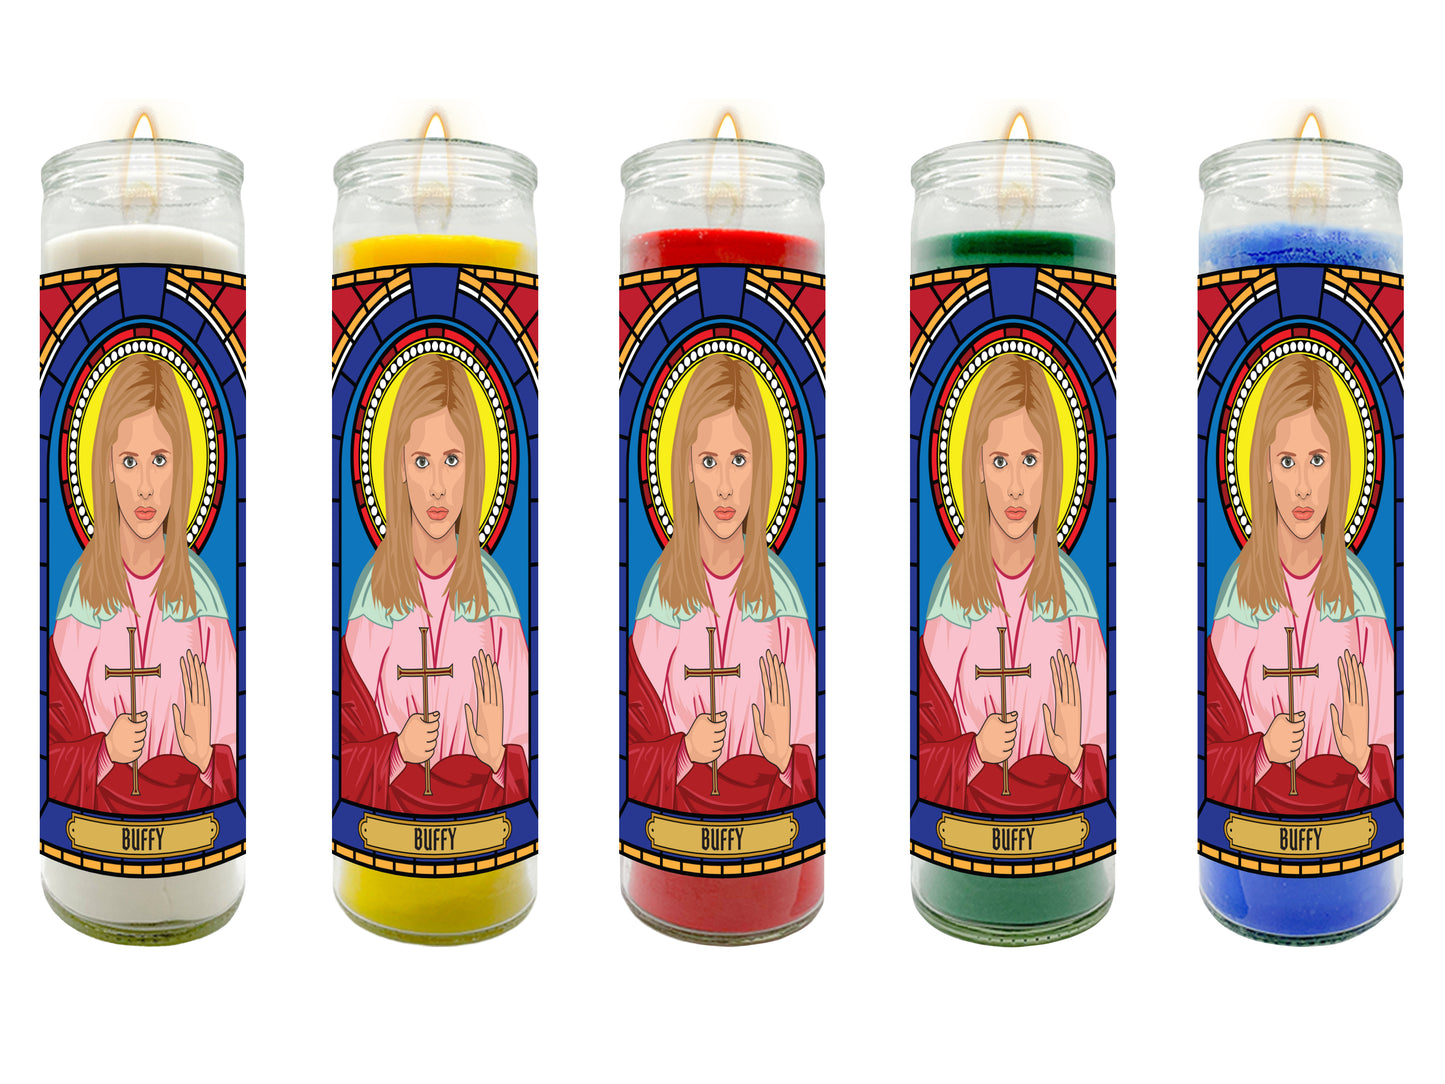 Buffy the Vampire Slayer Illustrated Prayer Candle Series